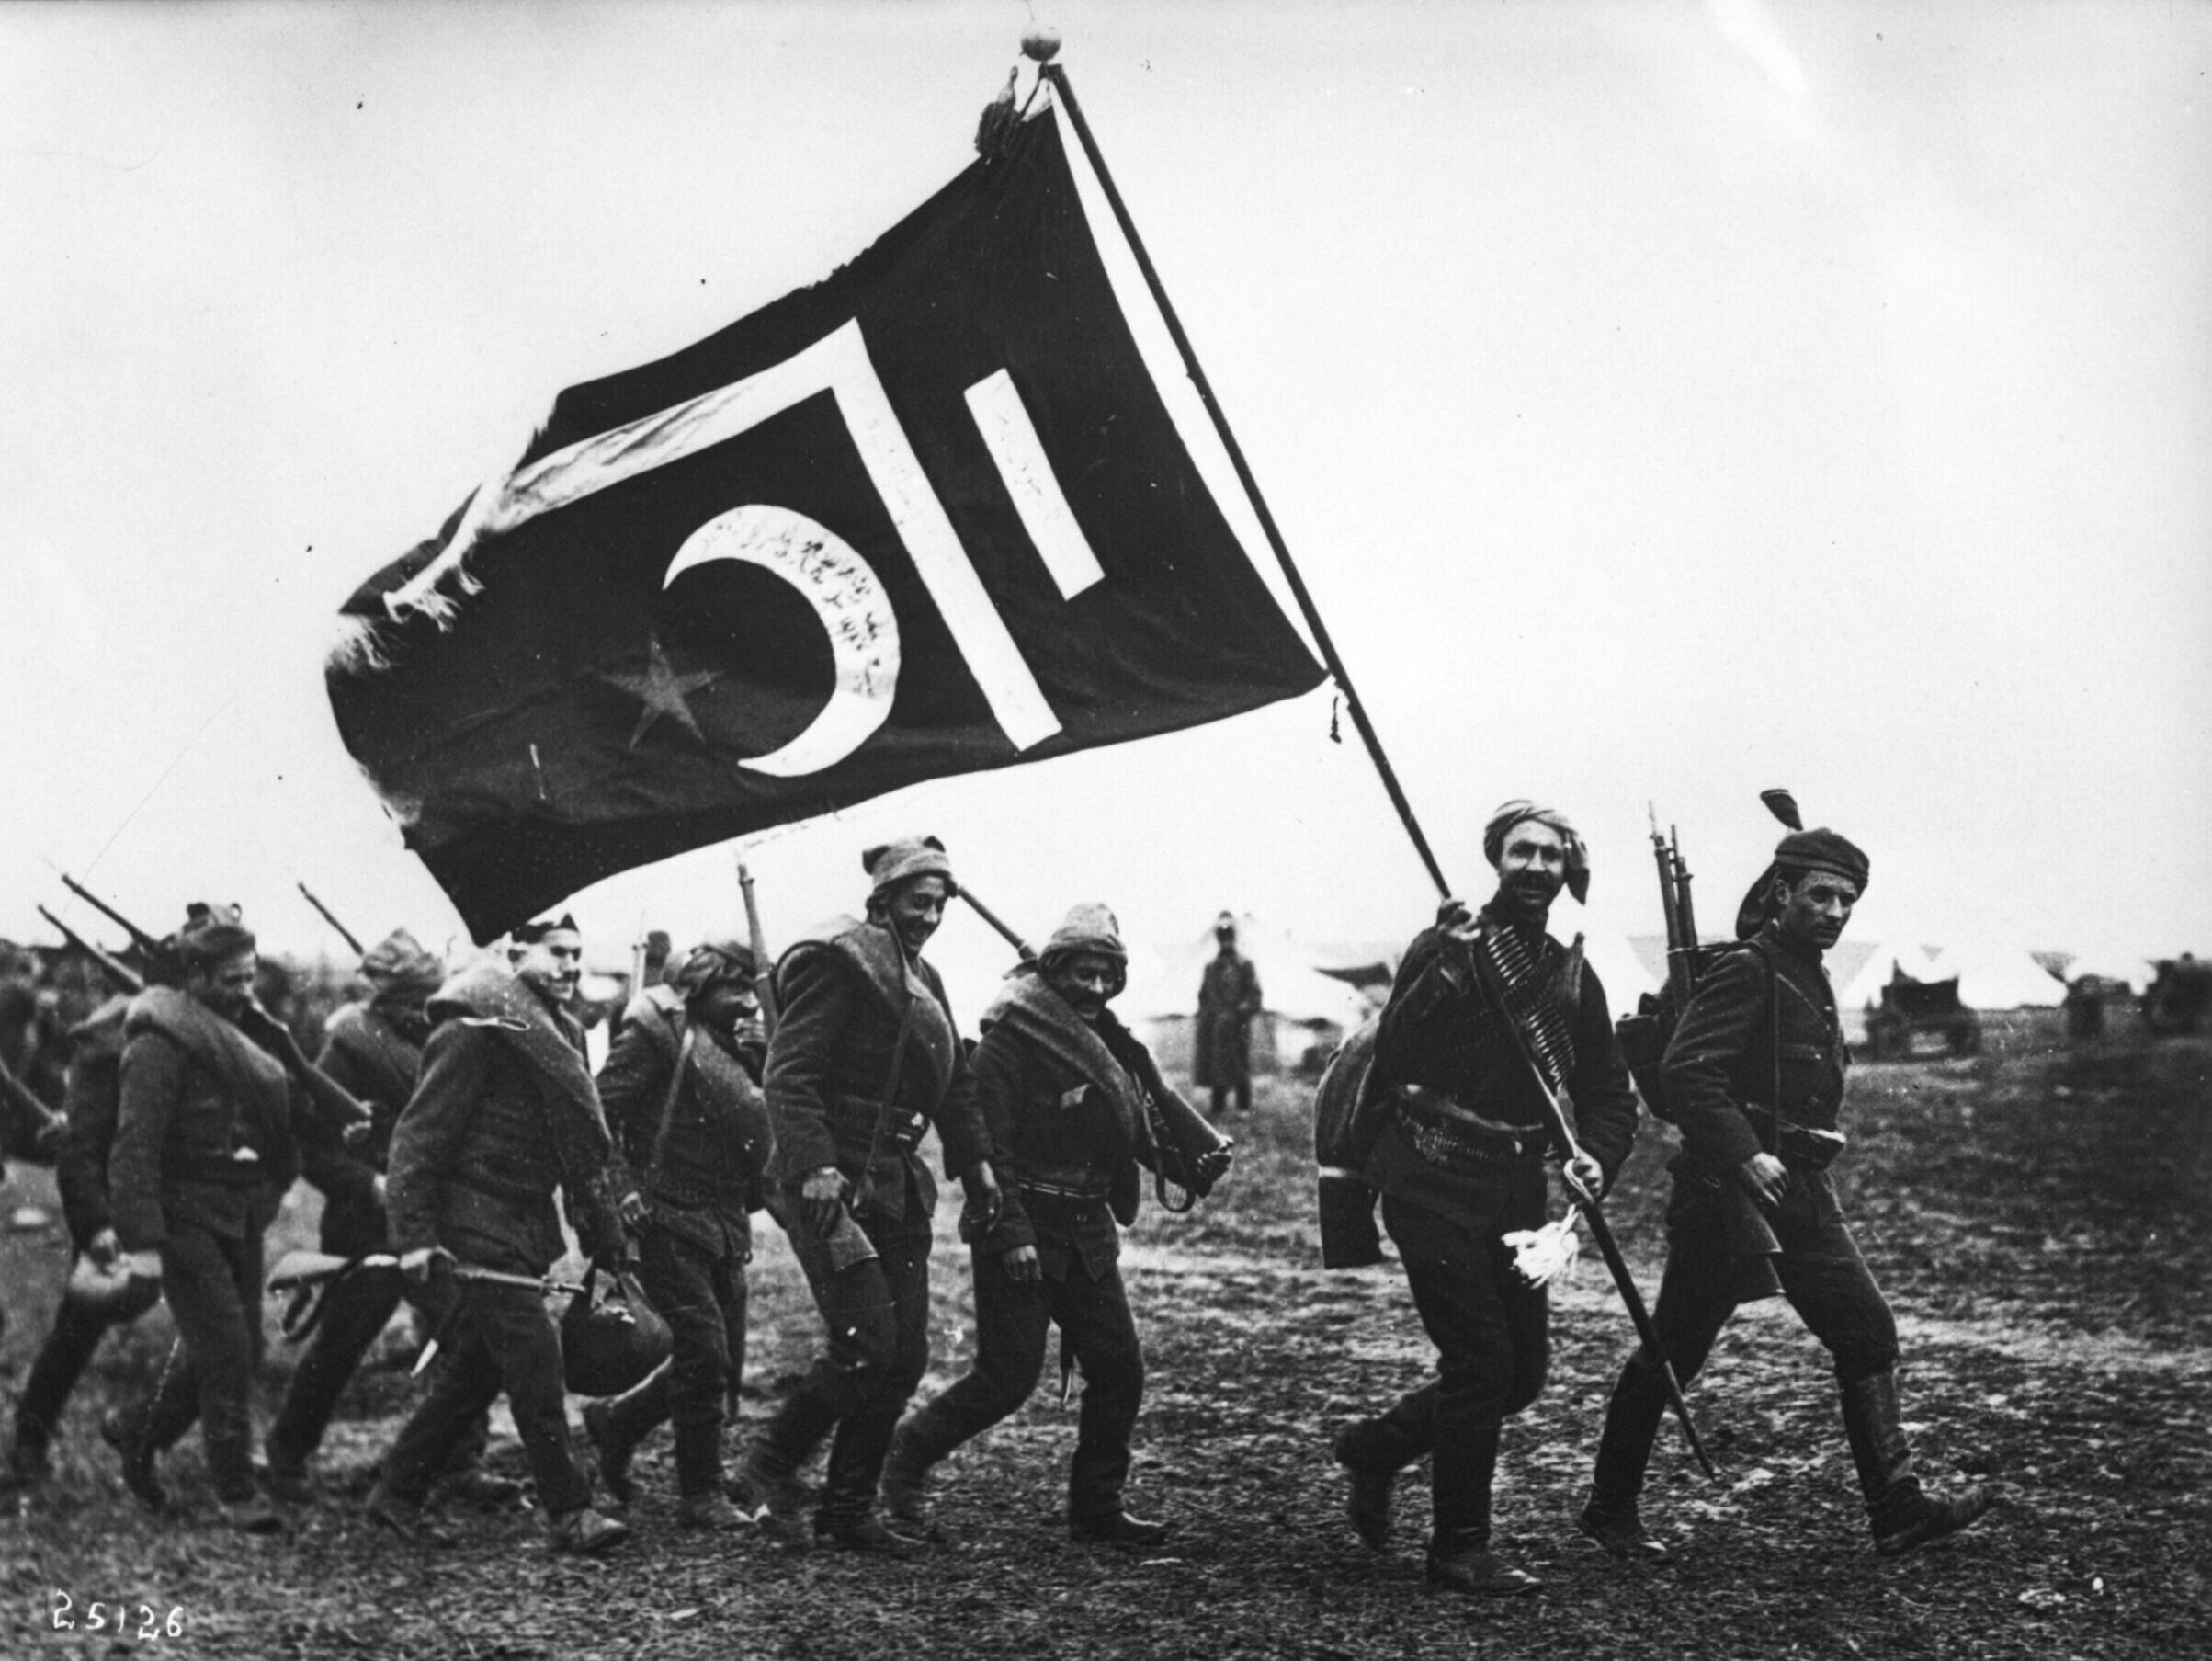 Ottoman_troops_with_flag.jpg